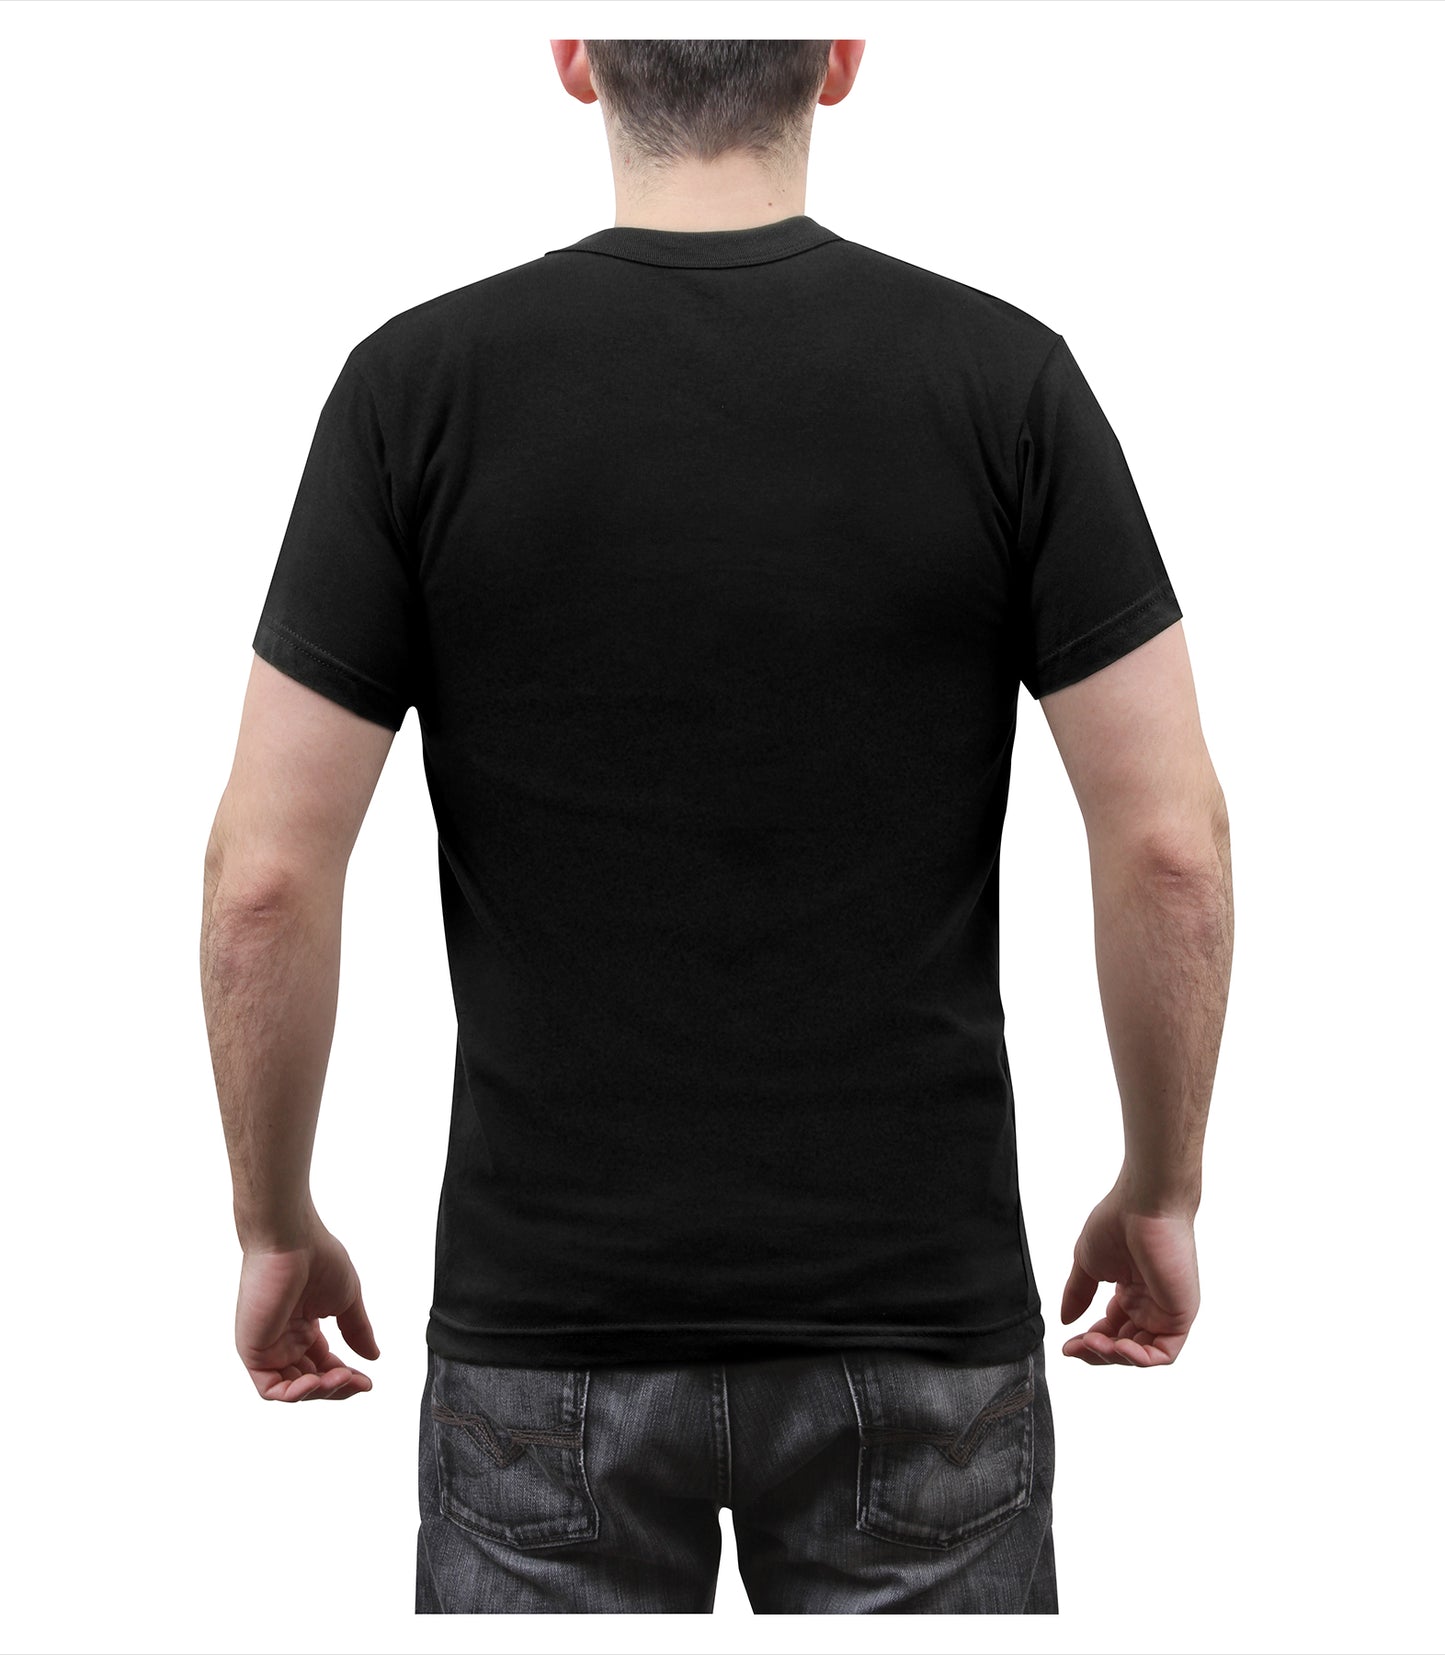 Rothco Distressed US Flag Black T-Shirt - Men's Poly/Cotton Athletic Fit Tee